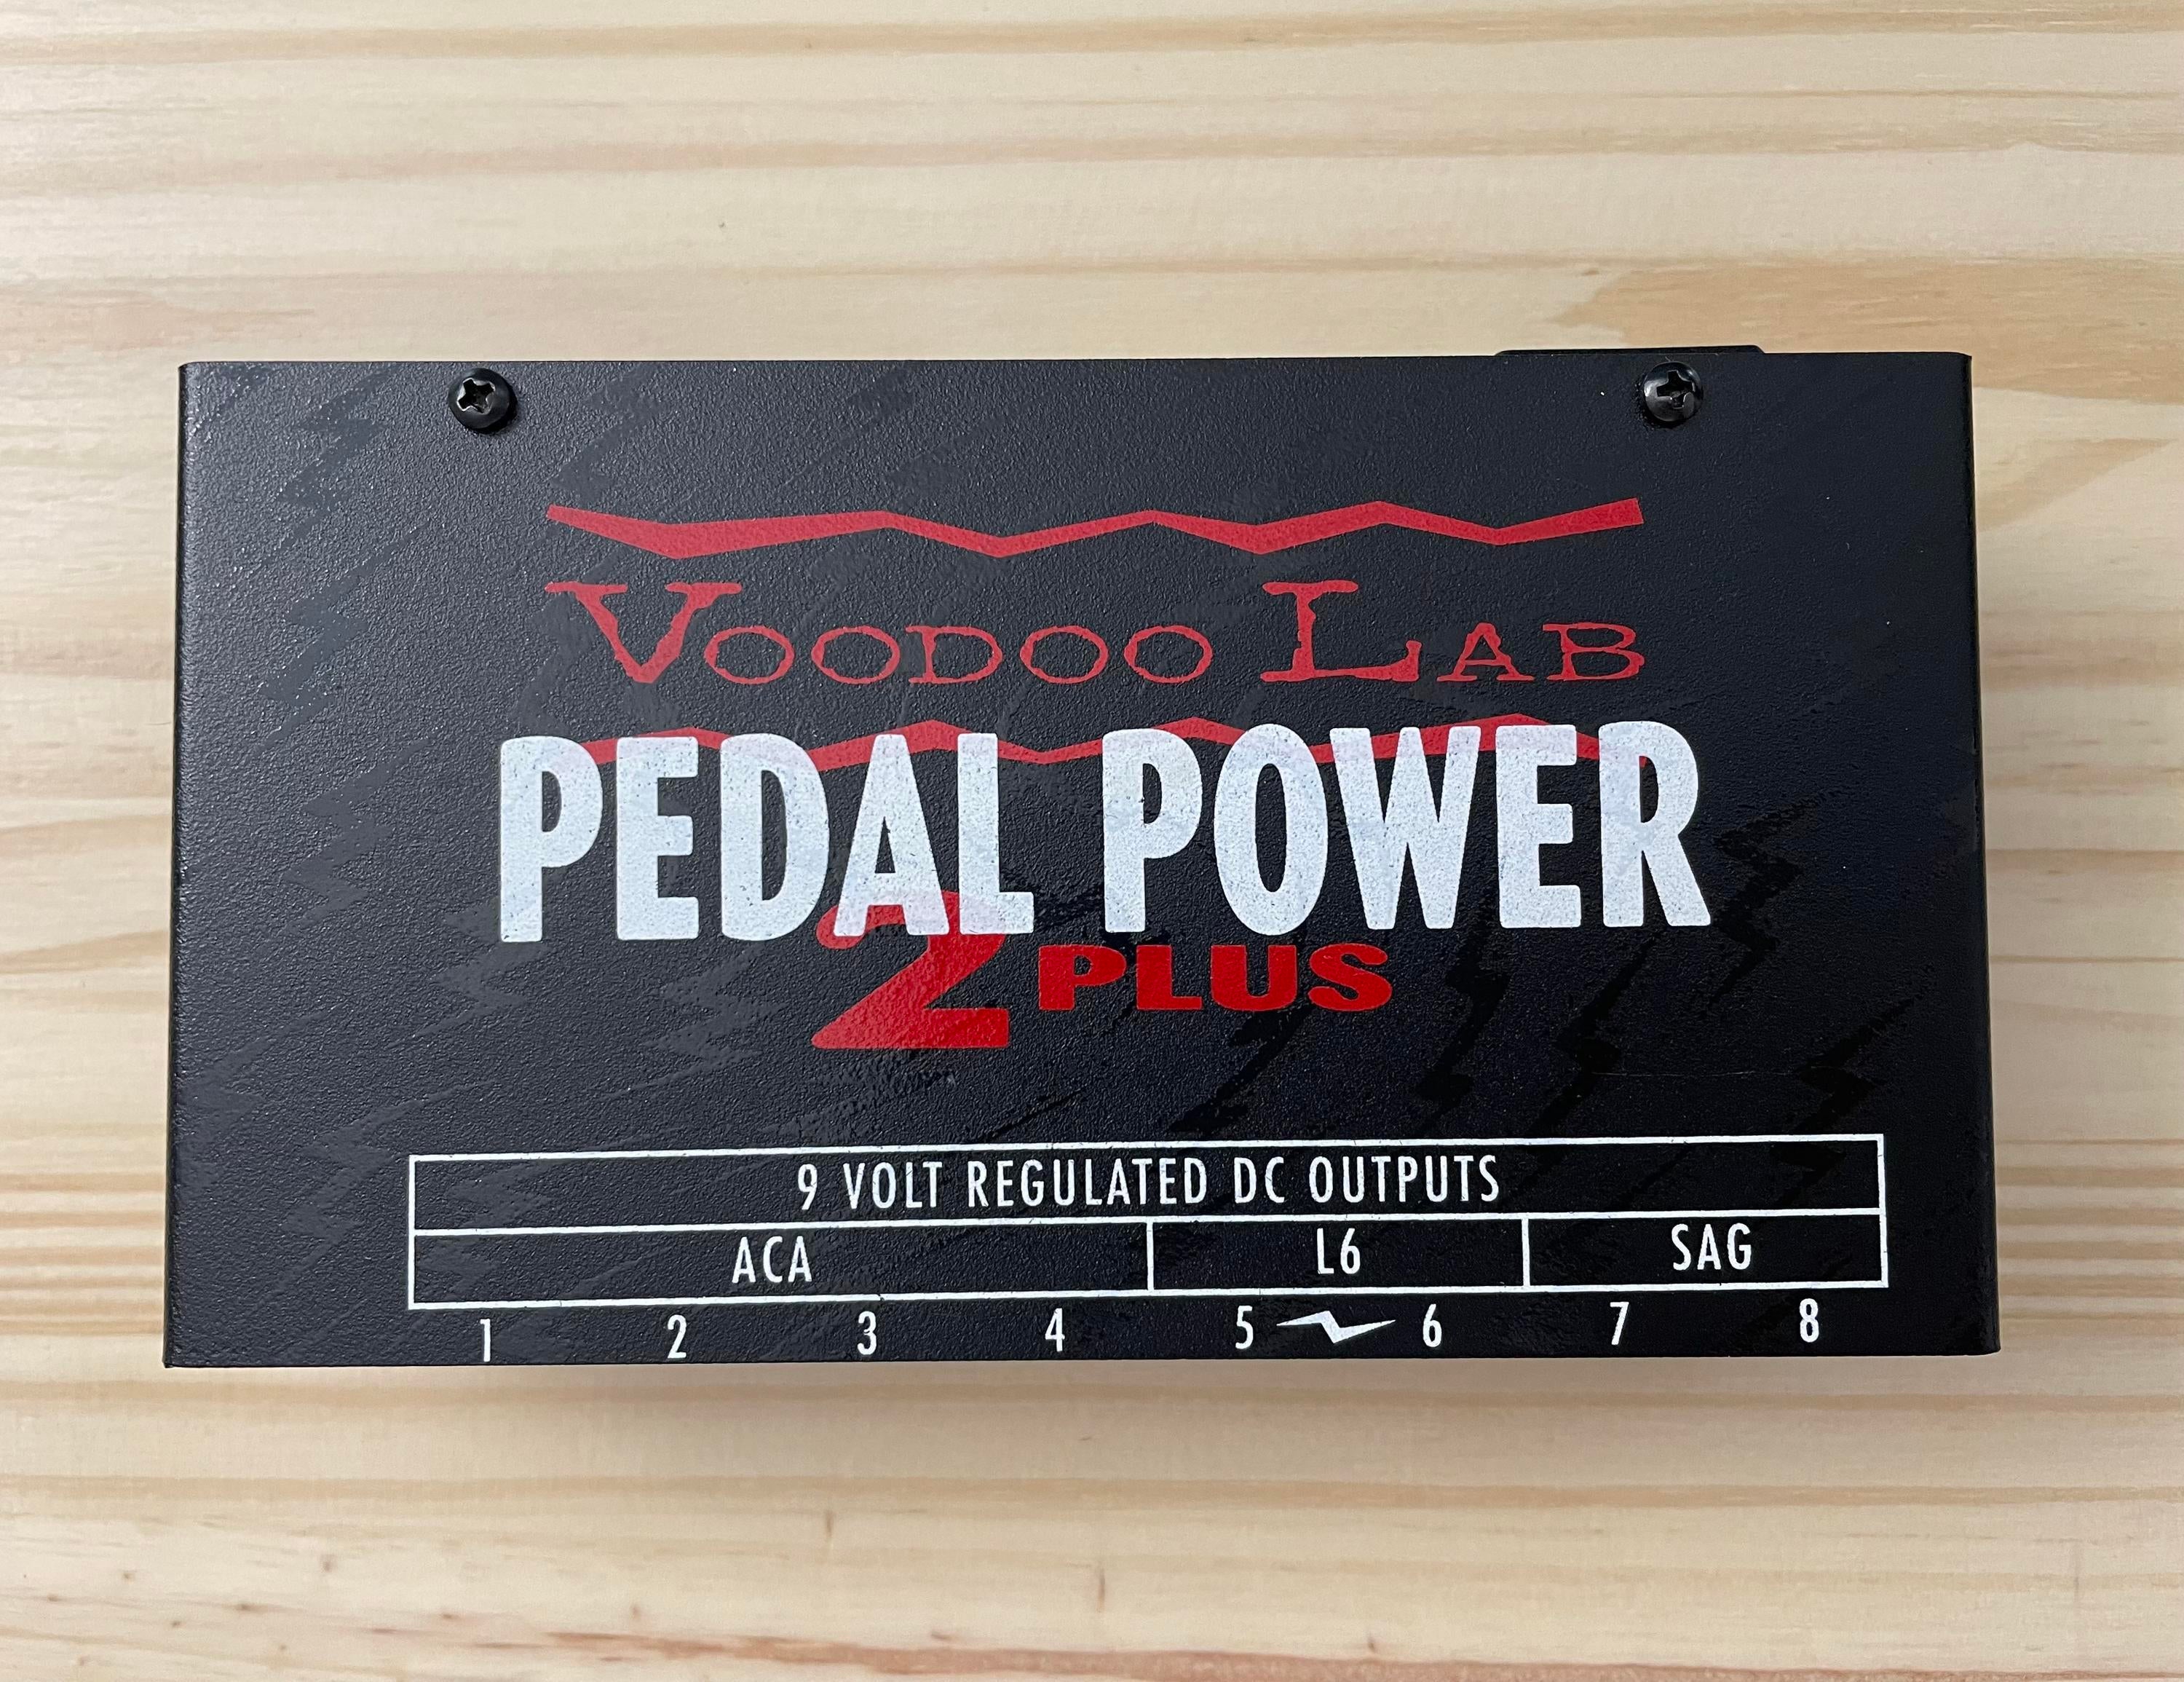 Used Voodoo Lab Pedal Power 2 PLUS pedal power W/ mounting brackets